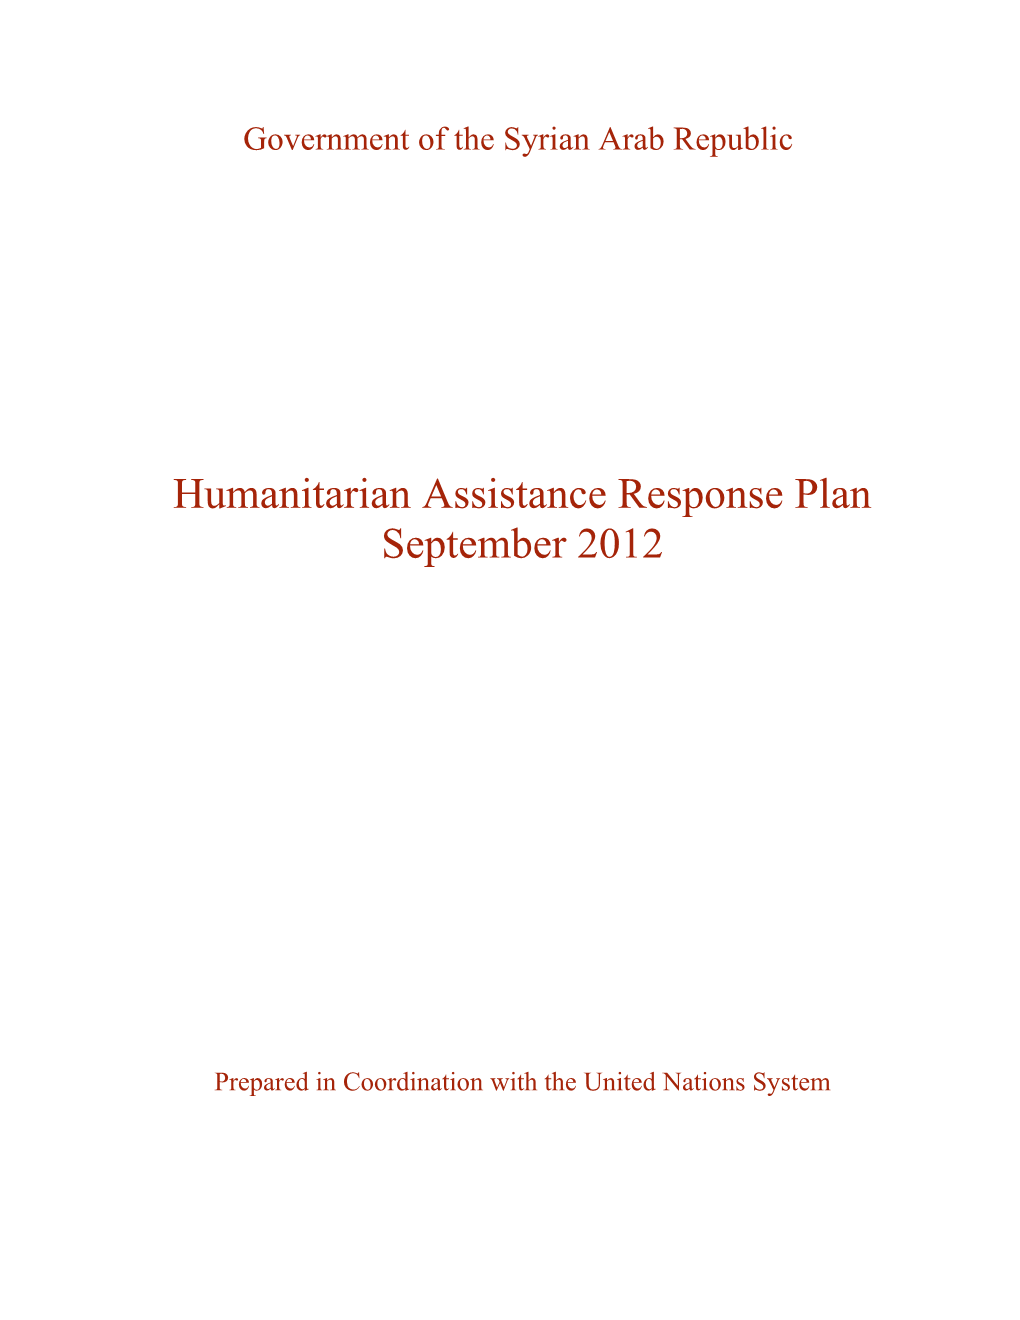 Syria Humanitarian Assistance Response Plan (September 2012) (Word) Finalized in November 2012